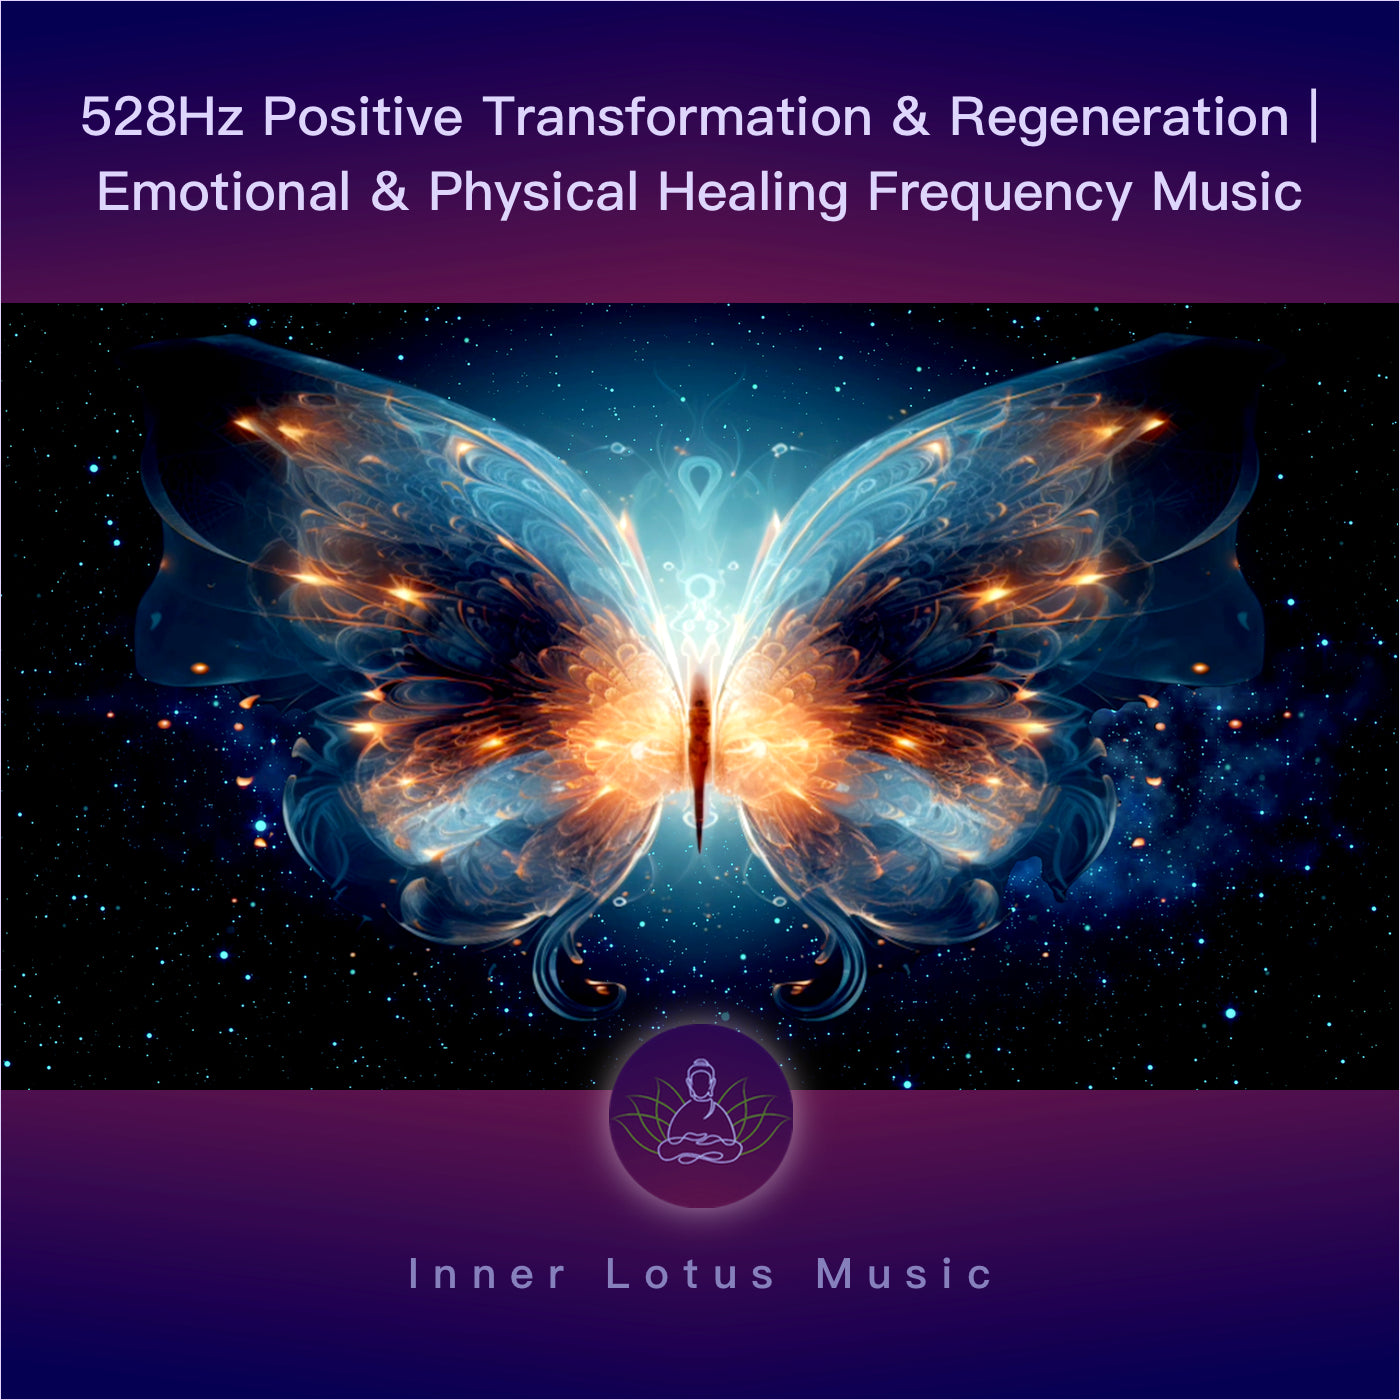 528Hz Positive Transformation & Regeneration | Emotional & Physical Healing Frequency Music